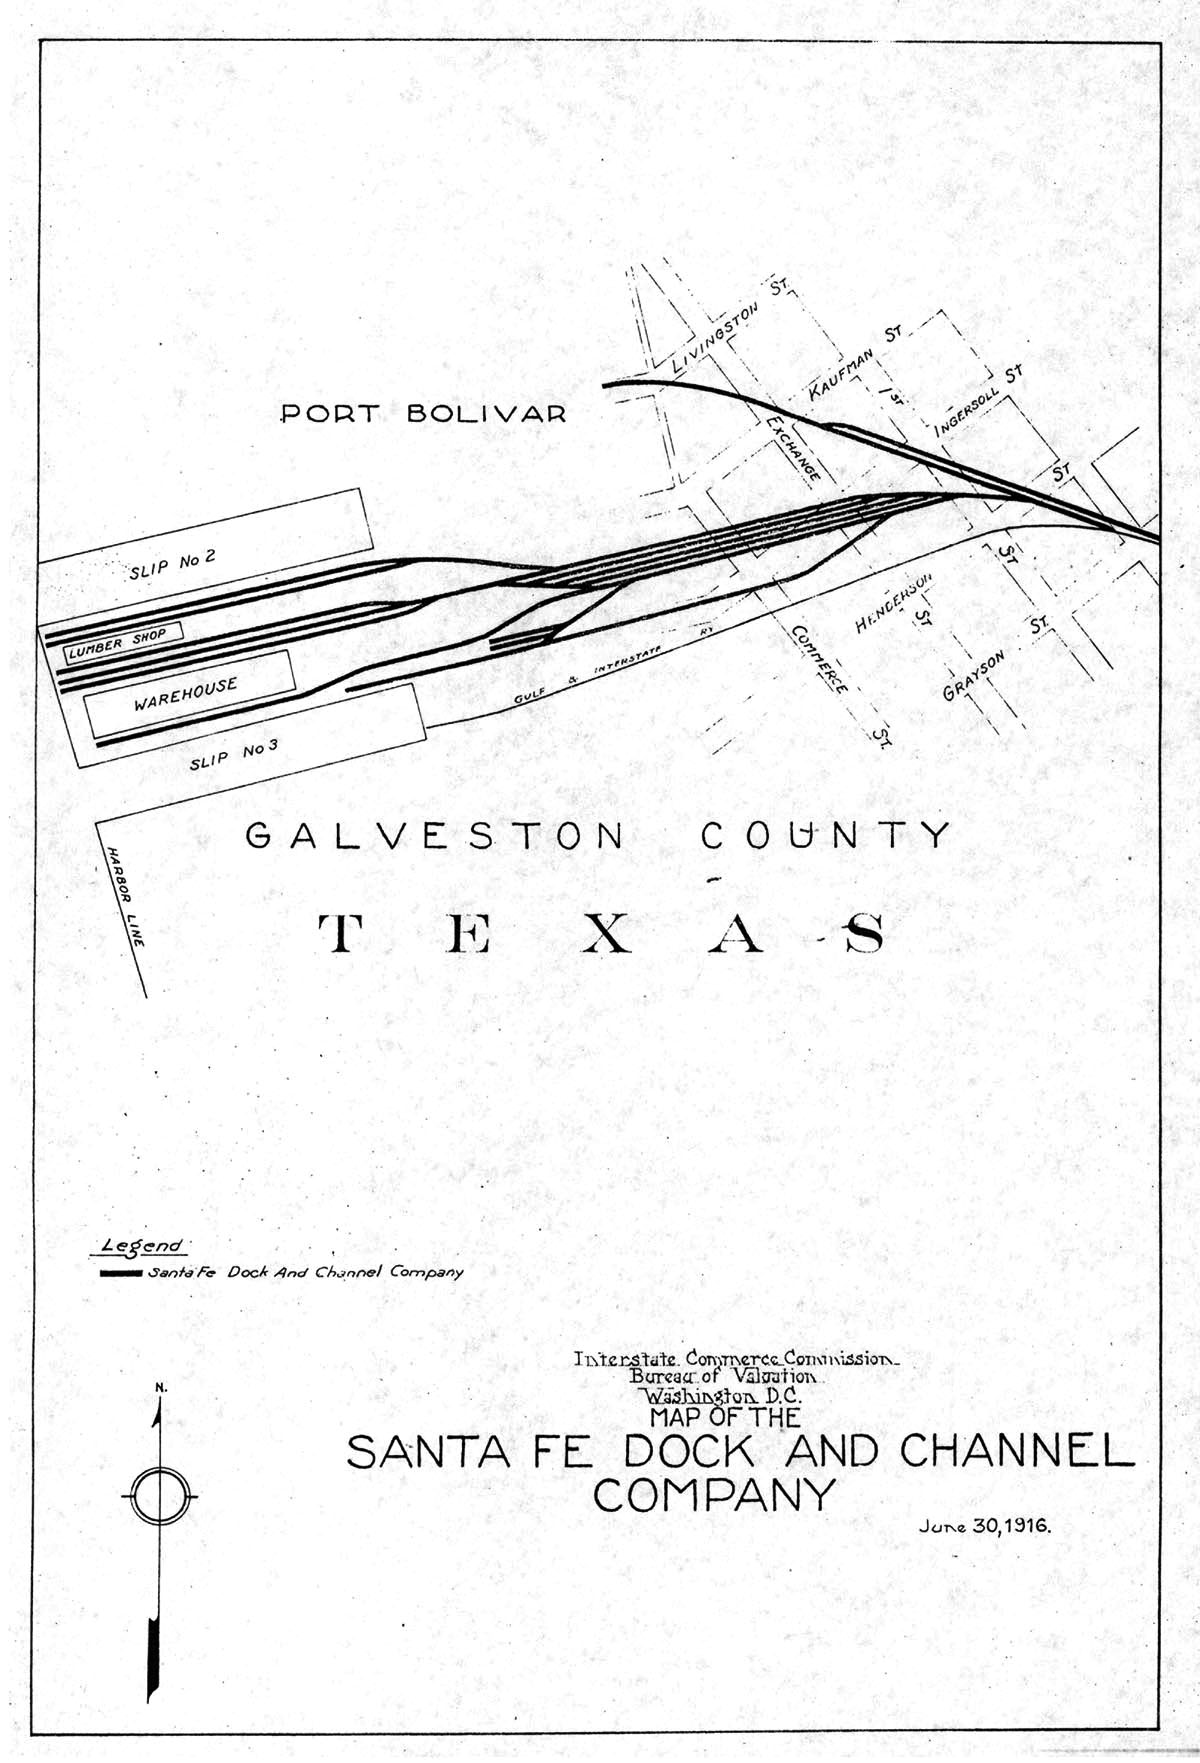 Santa Fe Dock & Channel Company (Tex.), Map Showing Industrial Tracks at Port Bolivar, Texas in 1916.